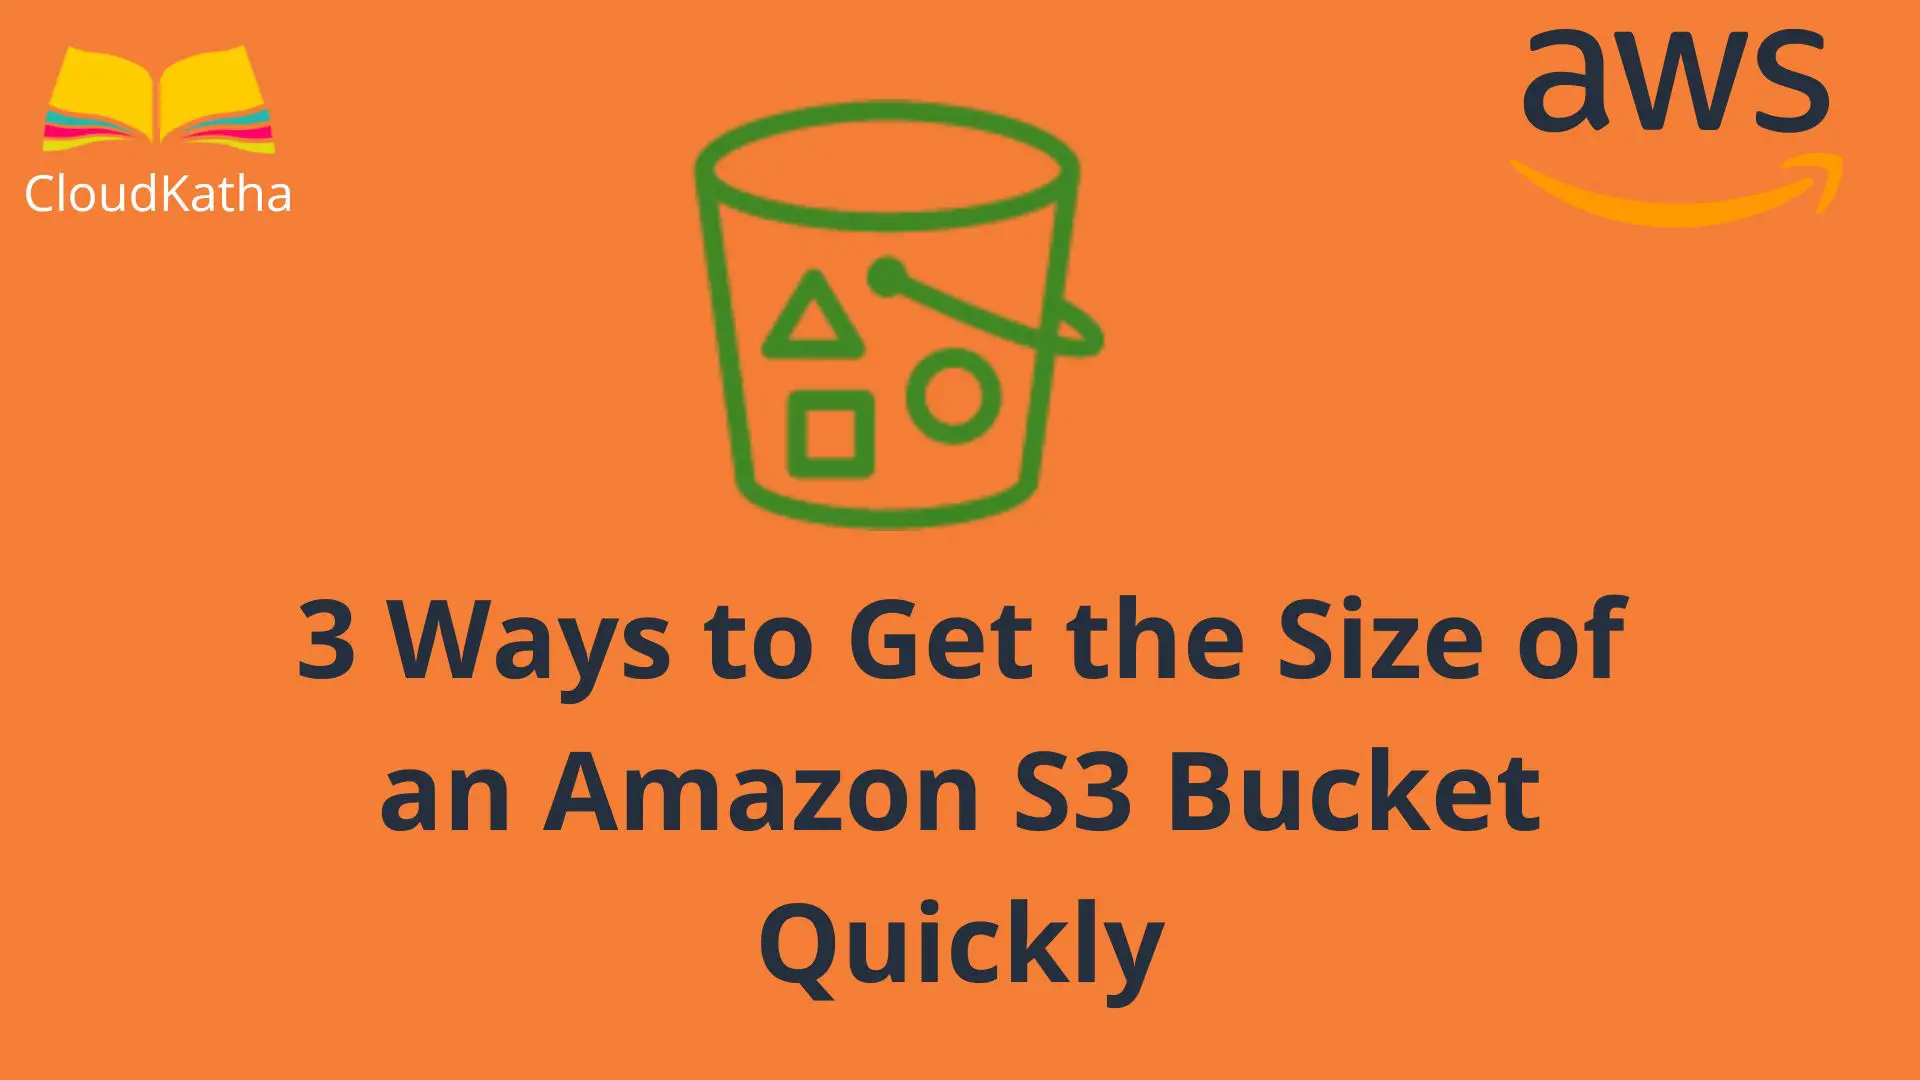 3 Ways to Get the Size of an Amazon S3 Bucket Quickly